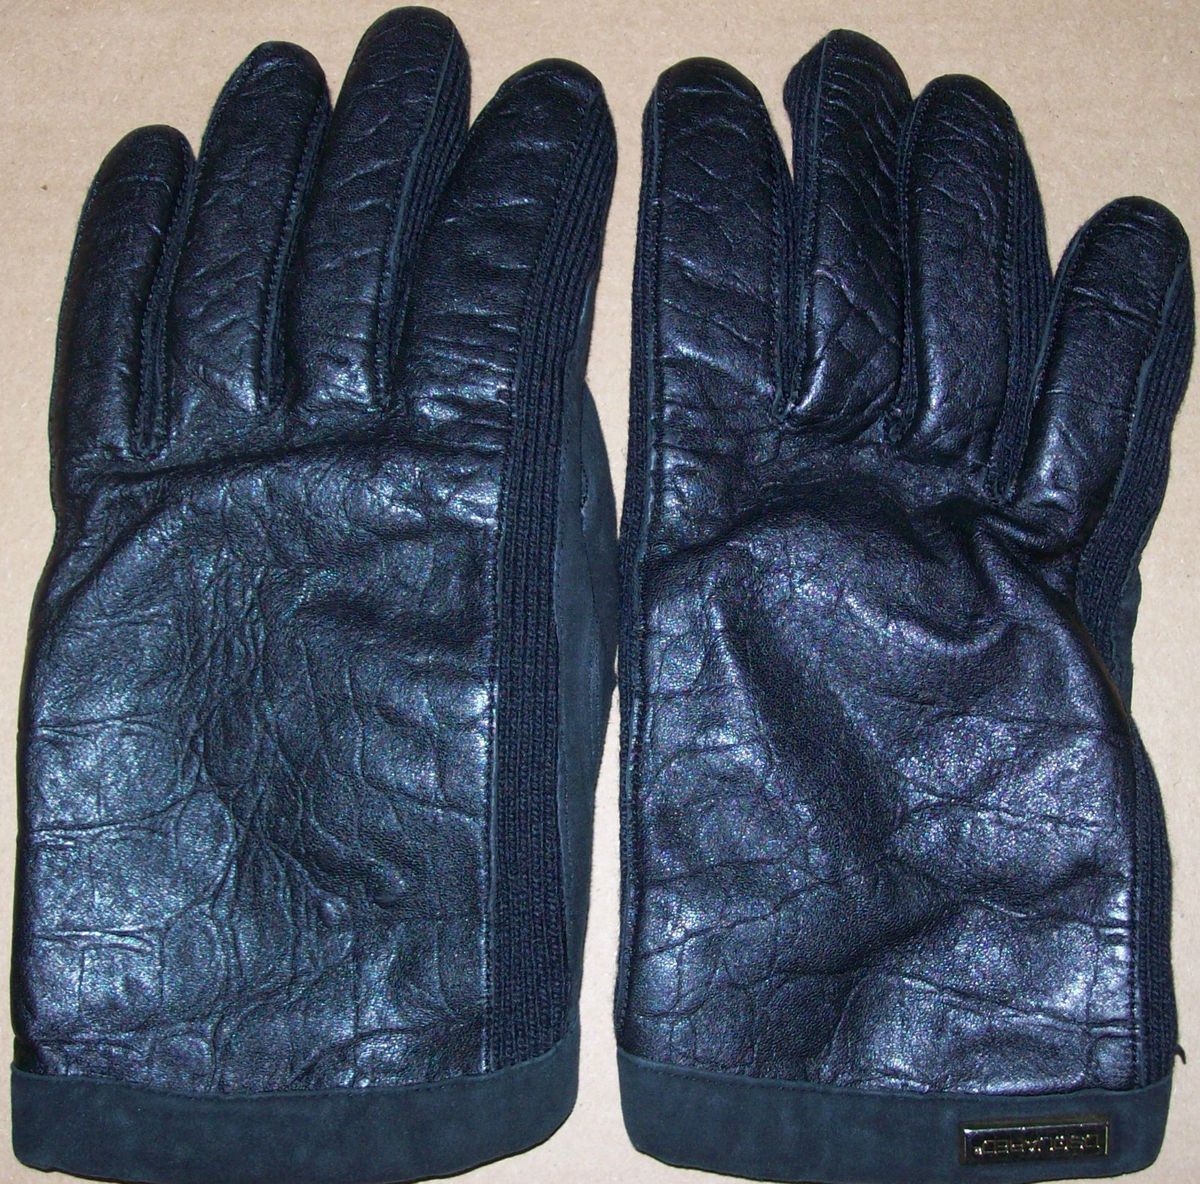 DSquared2 Leather Gloves Black cashmere lined croc crocodile embossed